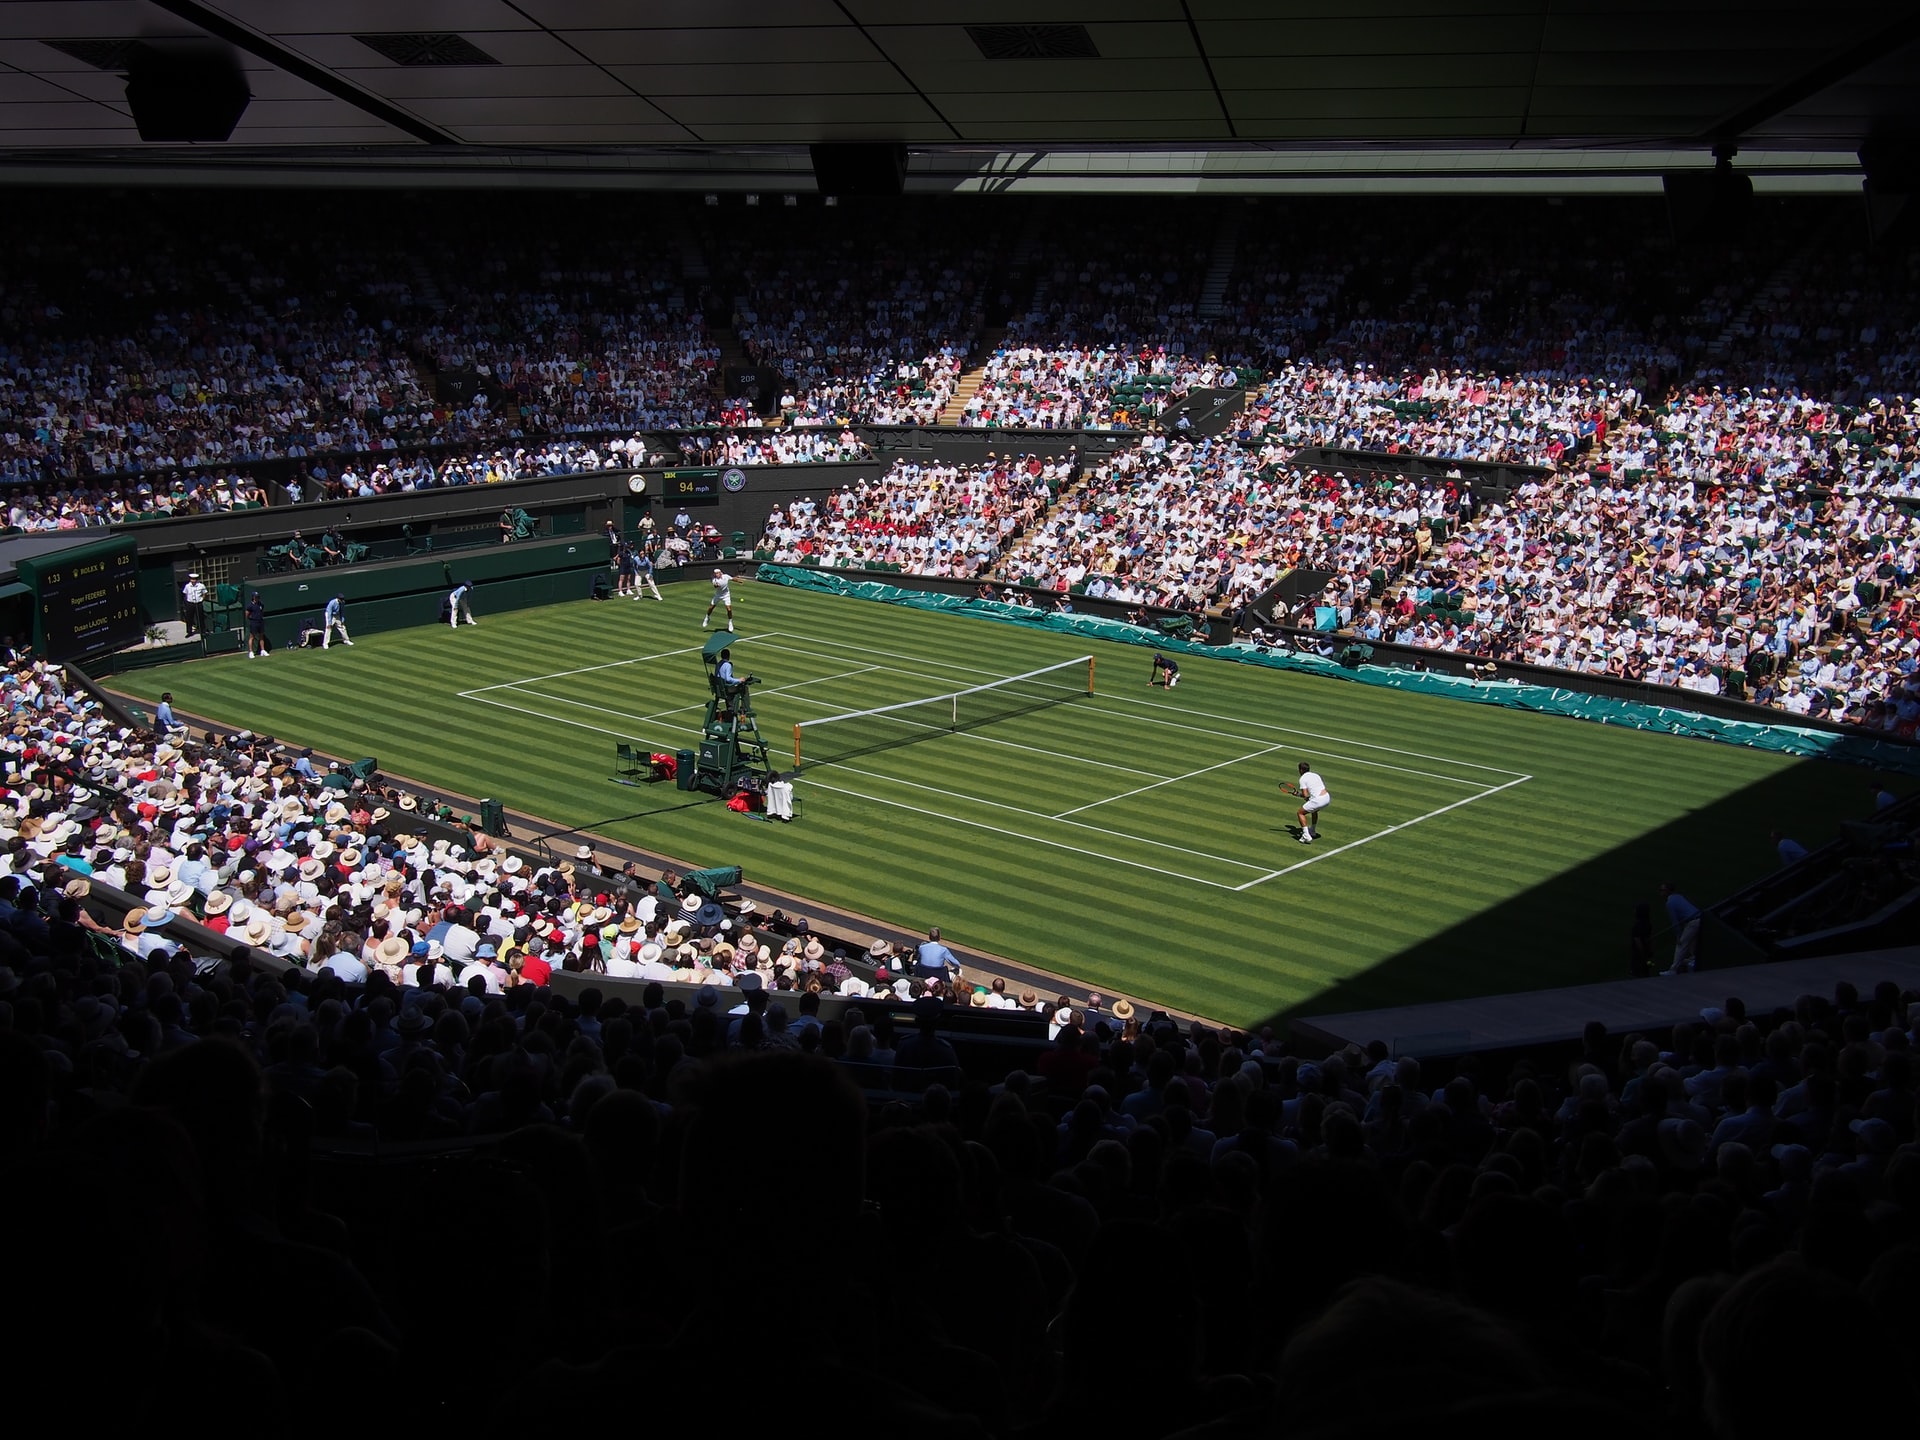 Wimbledon 2023: The charm and mystique that make the tournament special